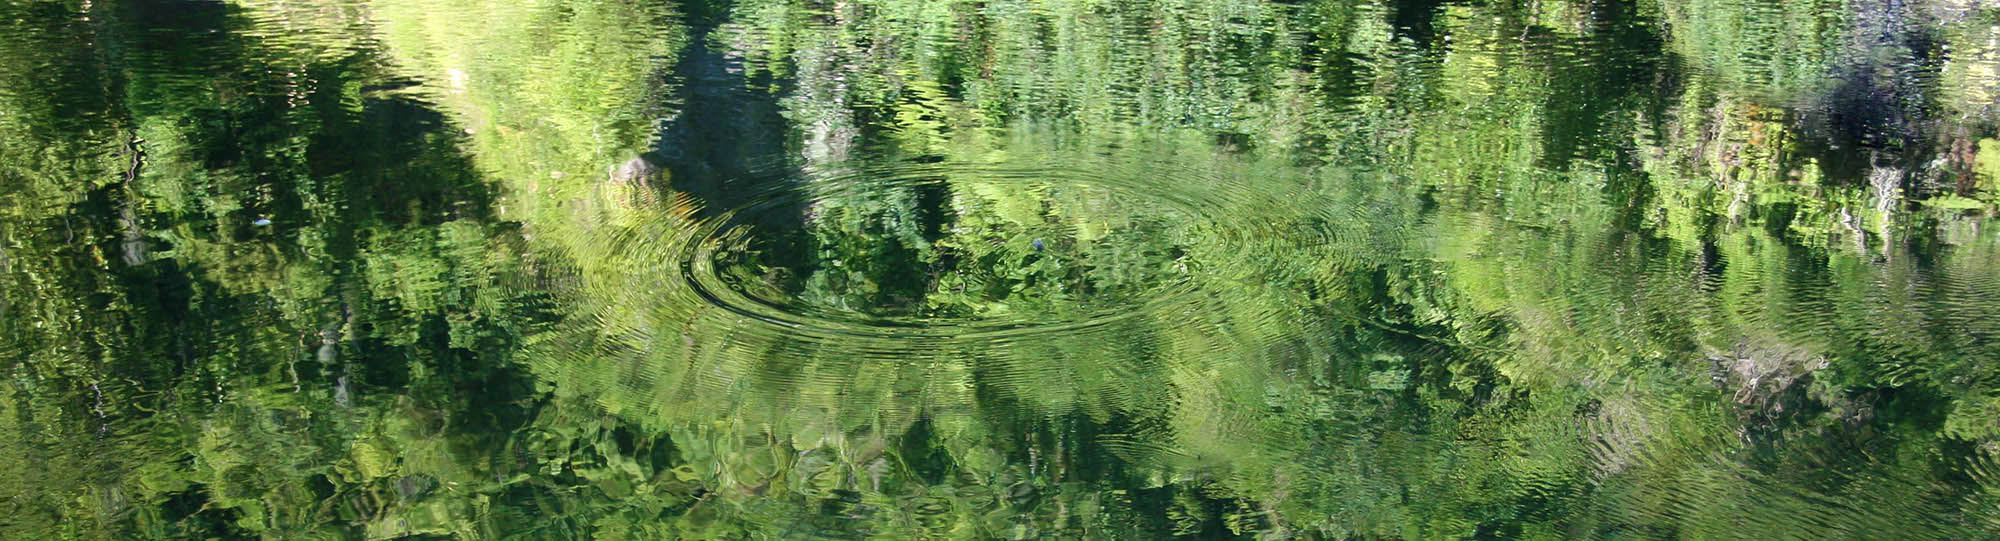 ring of ripples on water, reflecting surrounding bush valley, from cicada fly landing on surface